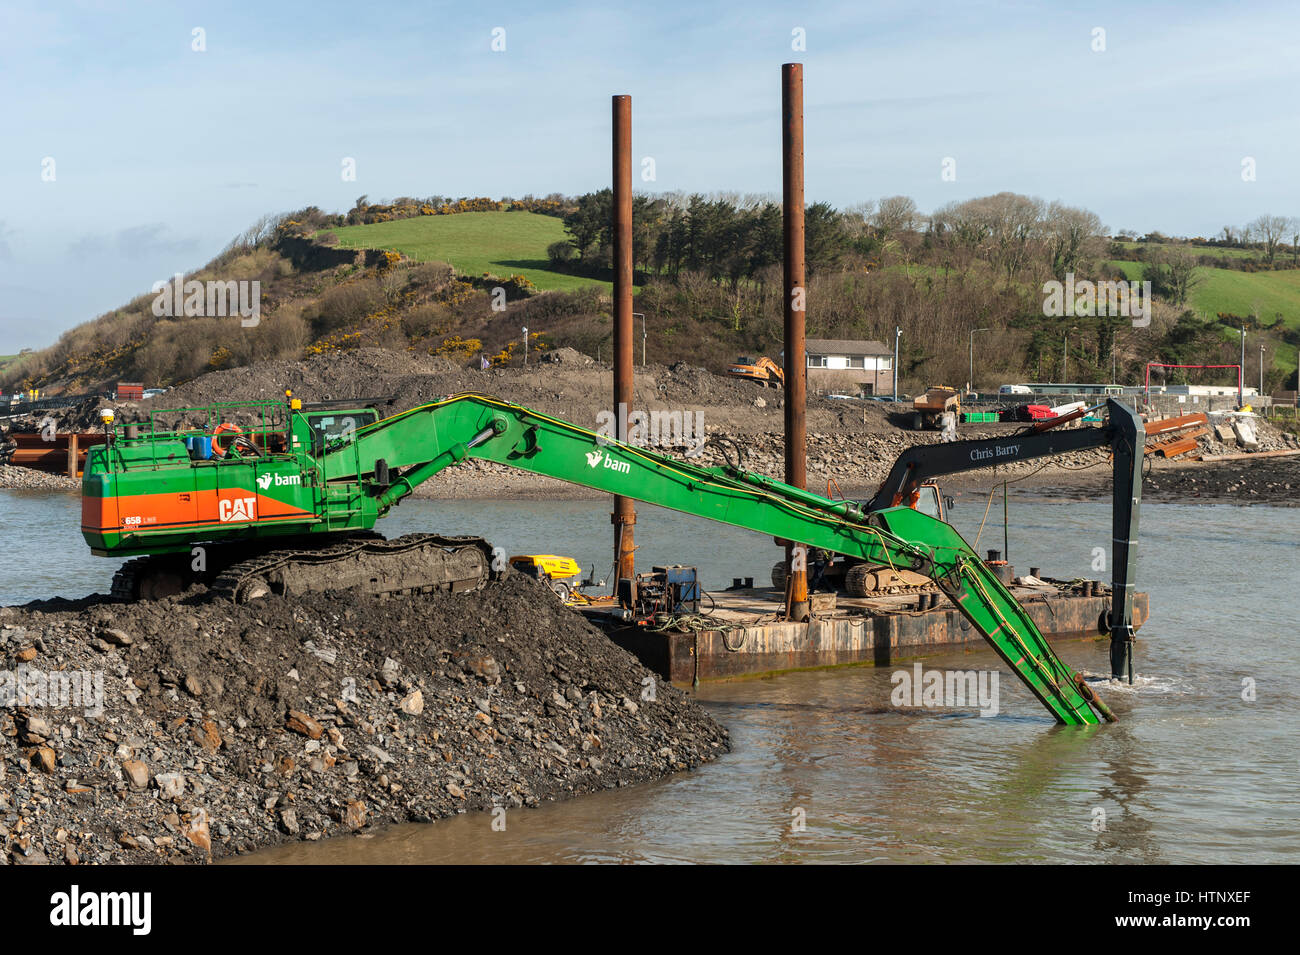 Bantry, Ireland. 13th Mar, 2017. Danish registered dredger 'Margrethe Fighter' has finished her work on the €8.5m Bantry Harbour Development project and has left the area. However, dredging is continuing by the use of mechanical diggers. Phase 1 of the development is due to be completed later this year. Credit: Andy Gibson/Alamy Live News Stock Photo